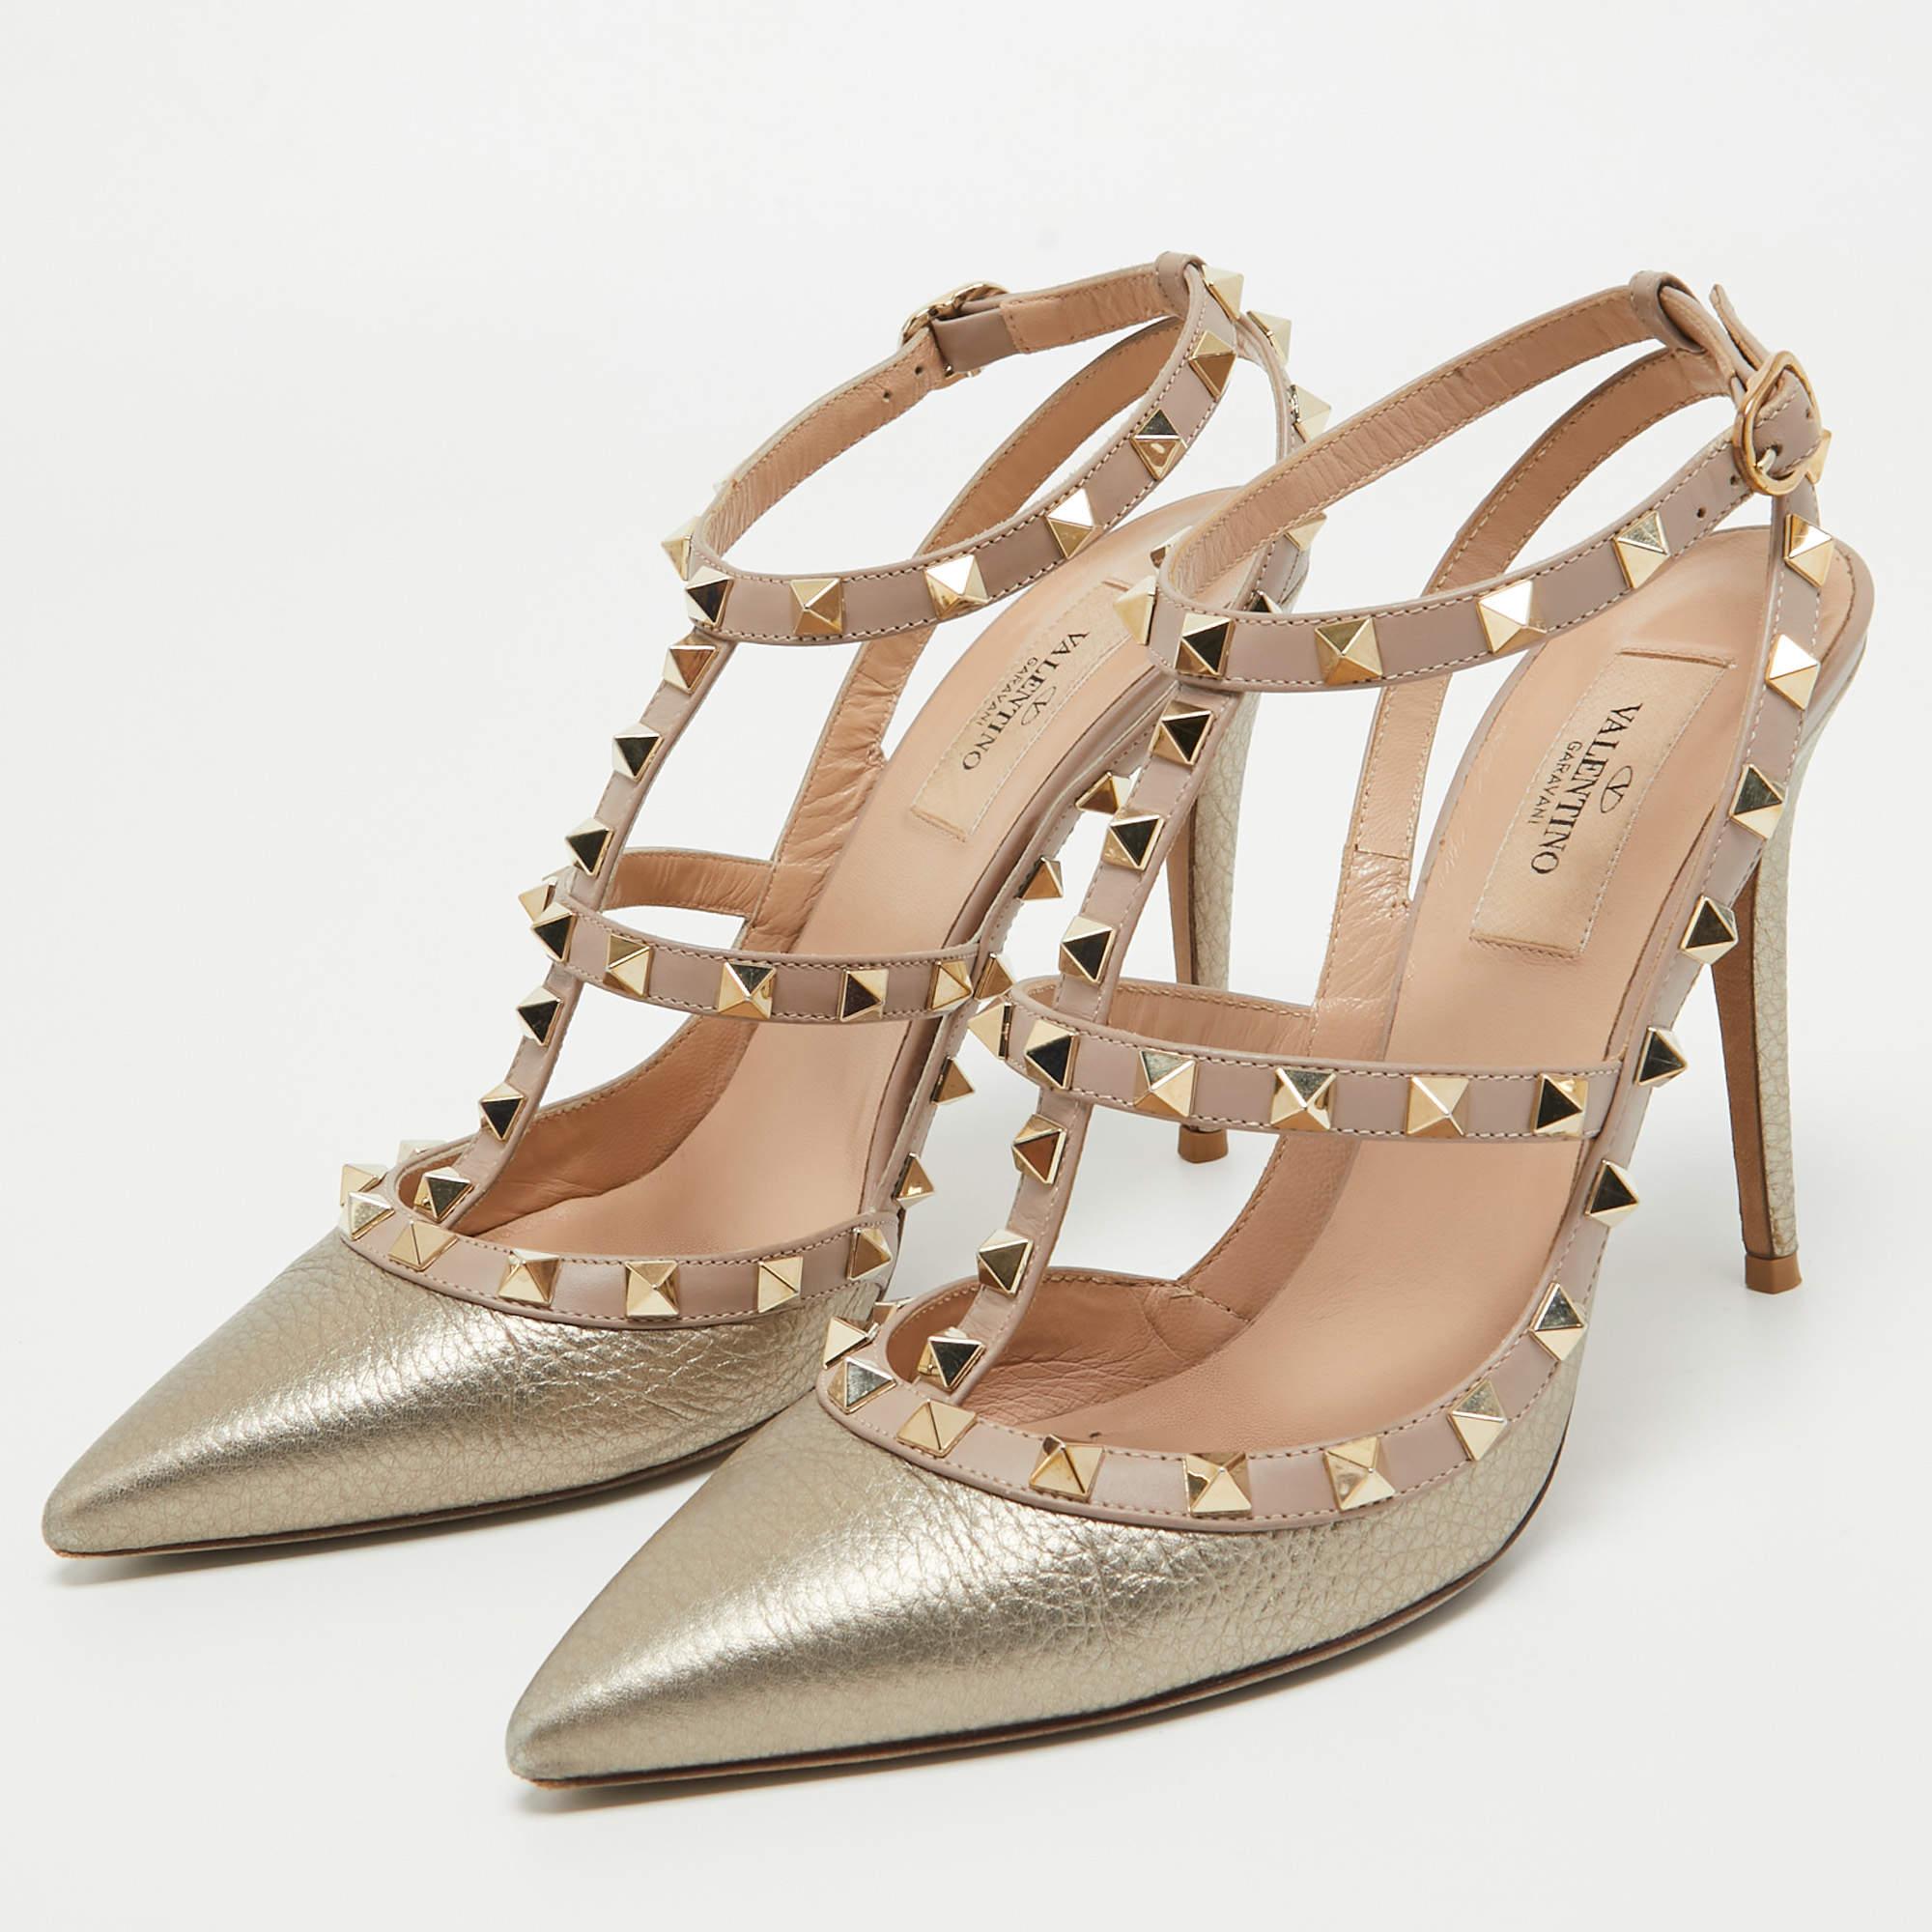 With meticulous craftsmanship and glamorous details, this Valentino pair of pumps reflects the brand's expertise in creating innovative and admirable designs. The Rockstuds elegantly outlines the upper straps and make it undeniably chic. Created